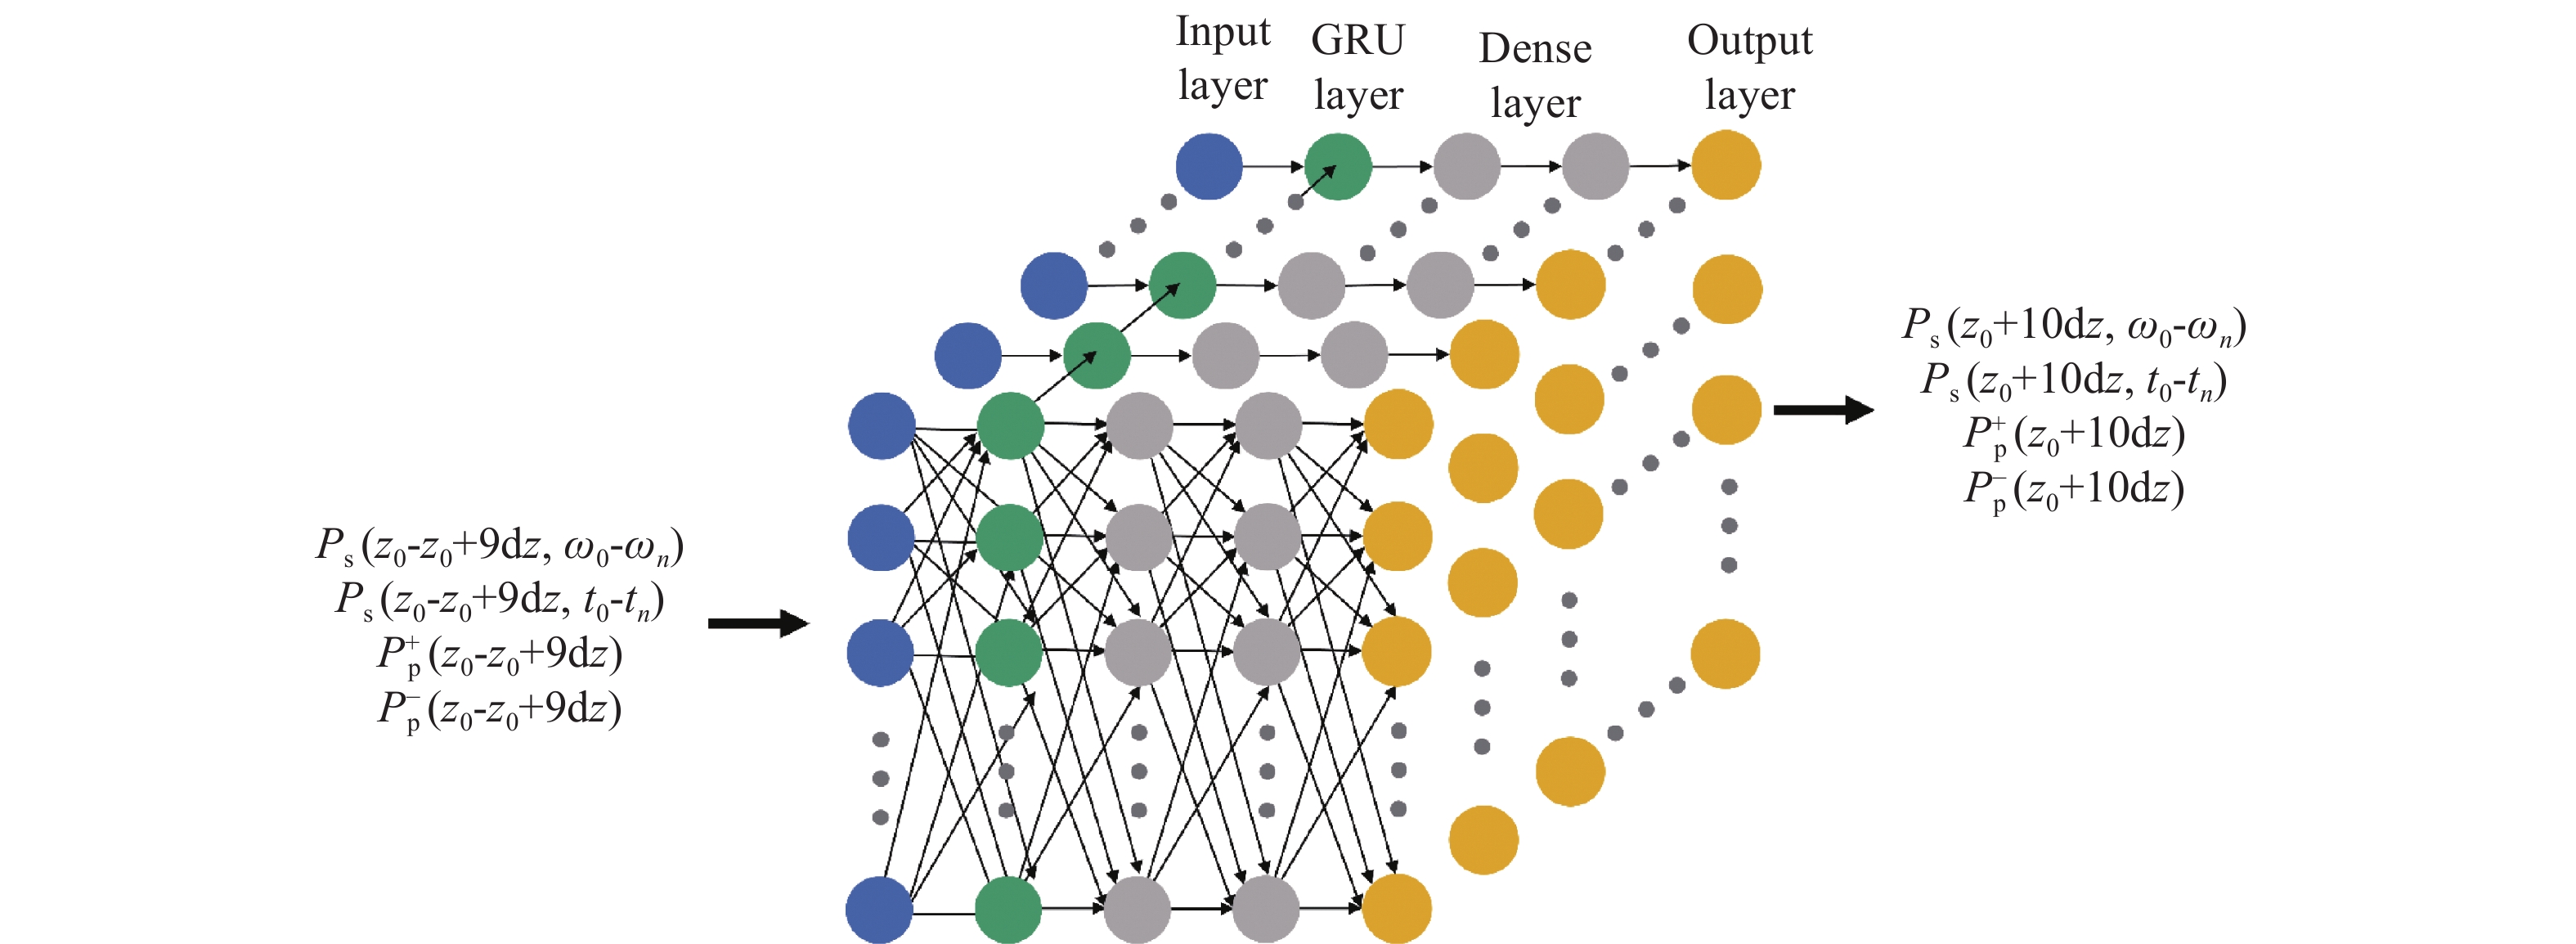 Schematic of the recurrent neural network architecture